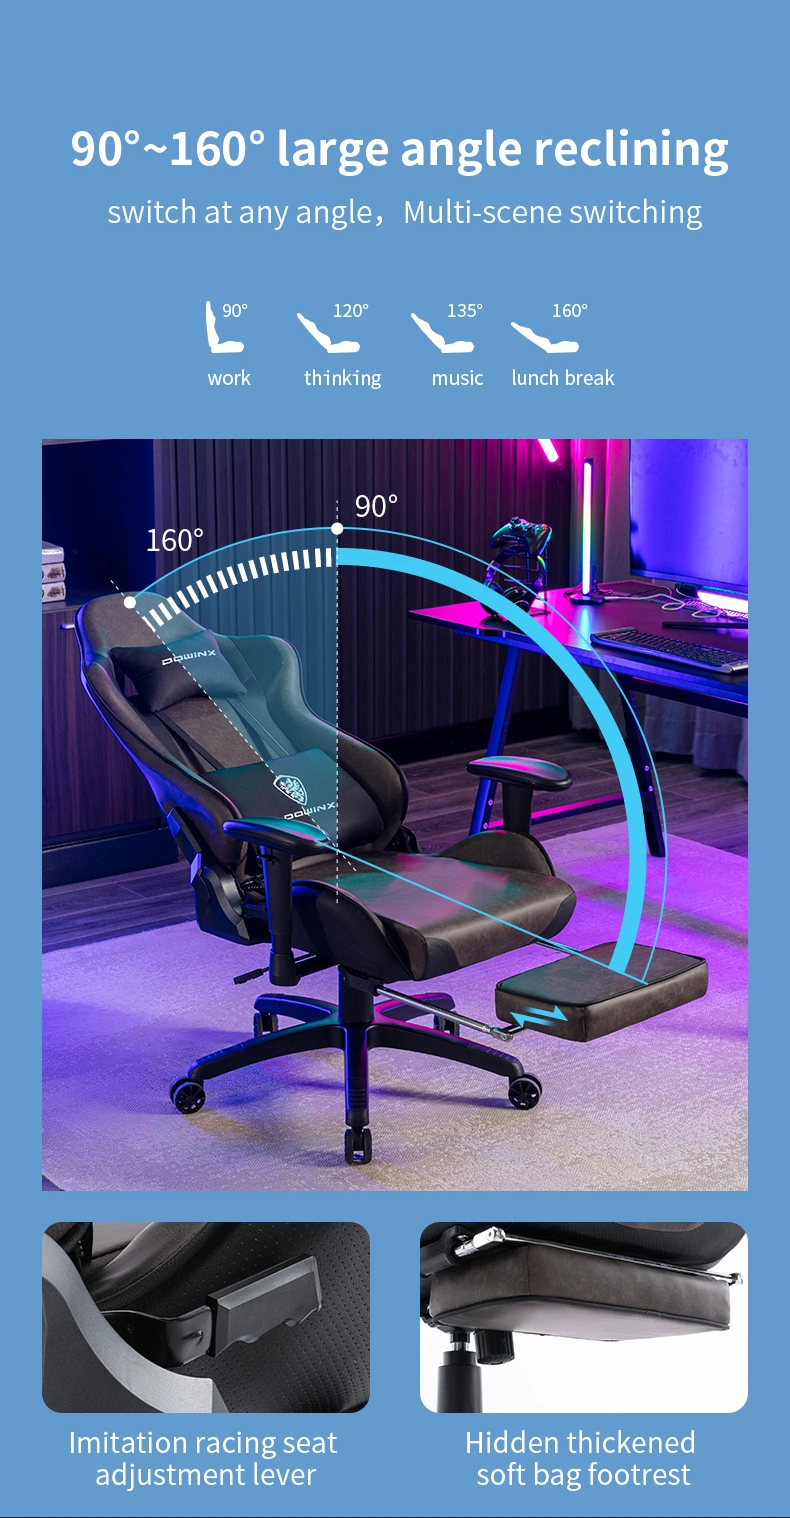 Amazon Dowinx Brand New Design Ergonomic Custom Logo Racing Chair Office Furniture Gaming Chair with Neck &amp; Foot Support